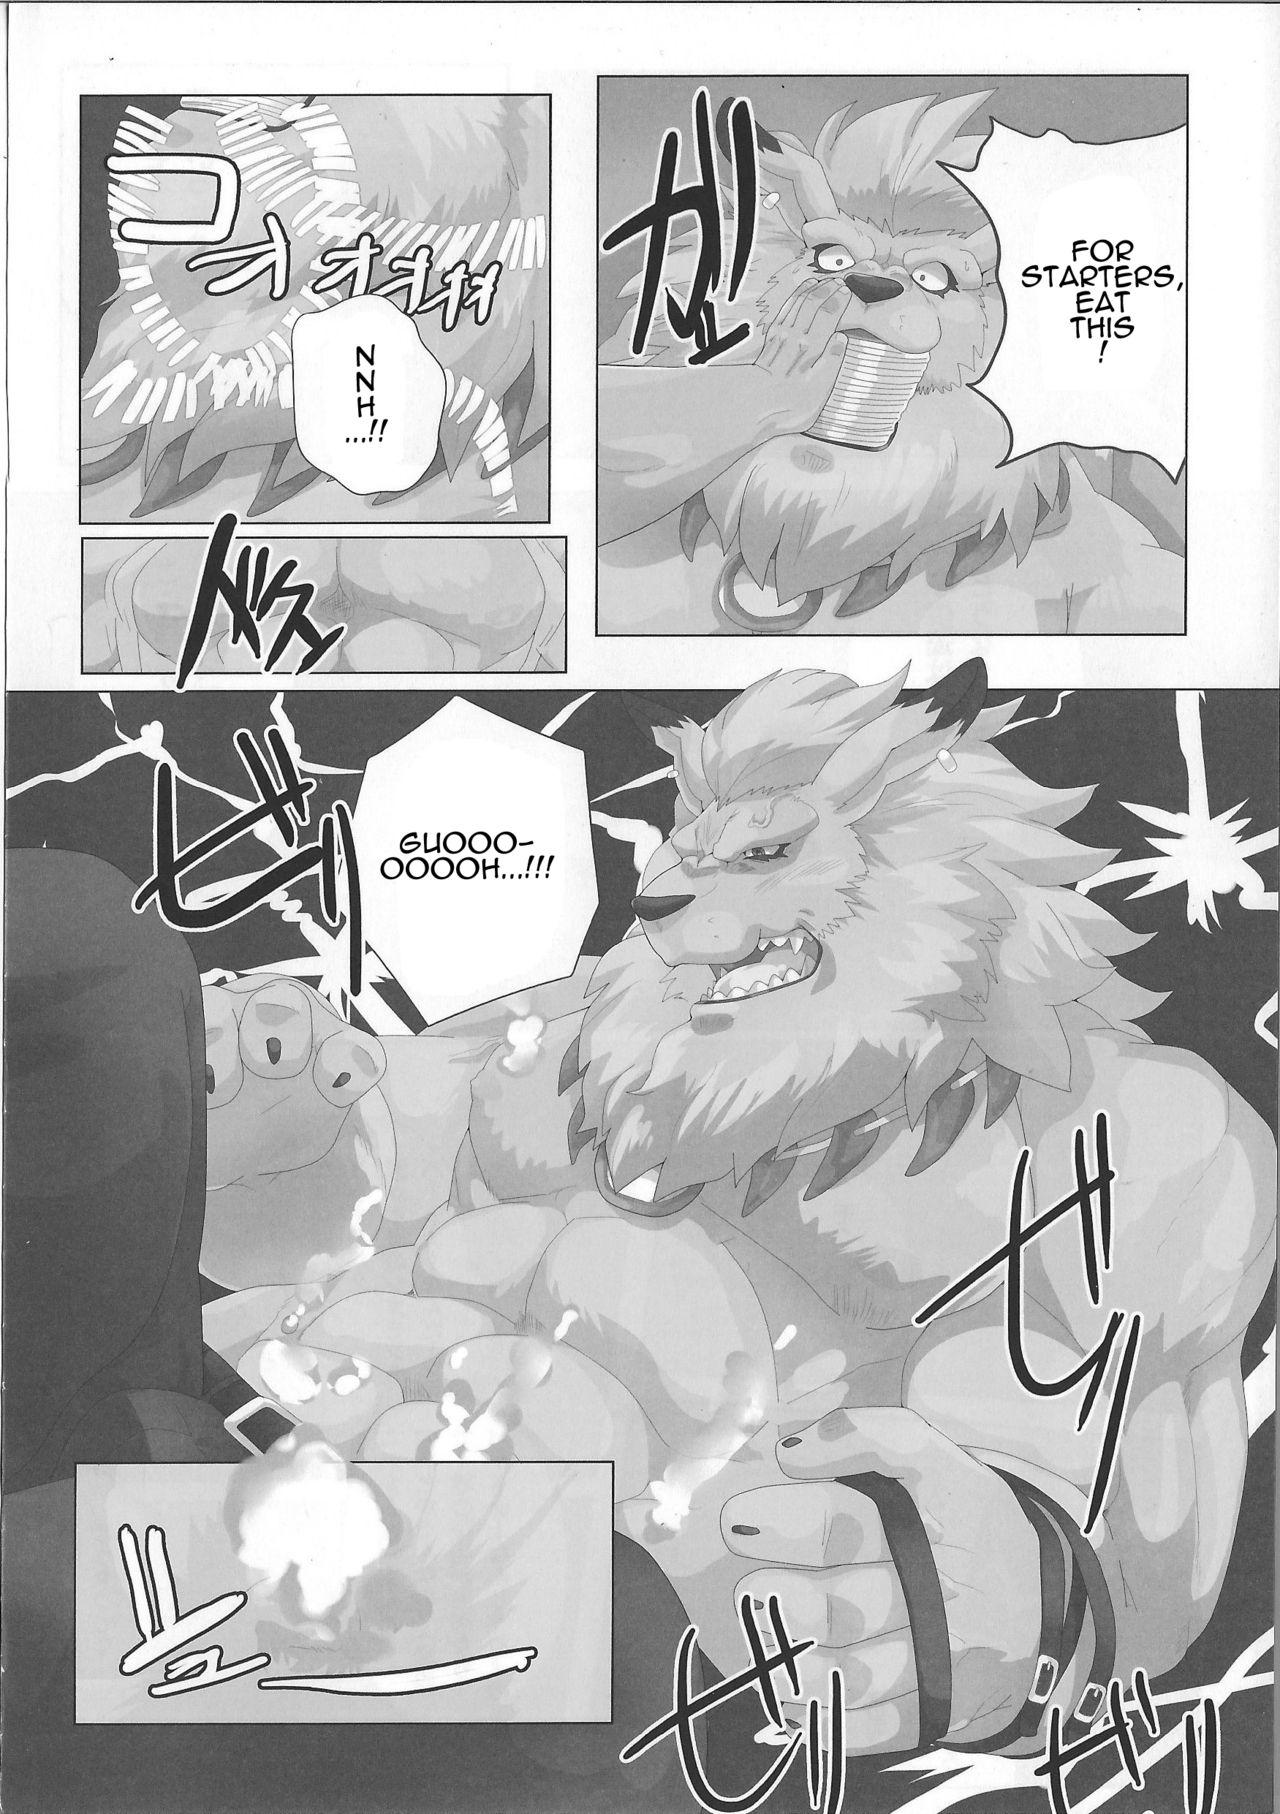 Black Thugs [Debirobu] For the Lion-Man Type Electric Life Form to Overturn Fate - Leomon Doujin [ENG] - Digimon Sucks - Page 8